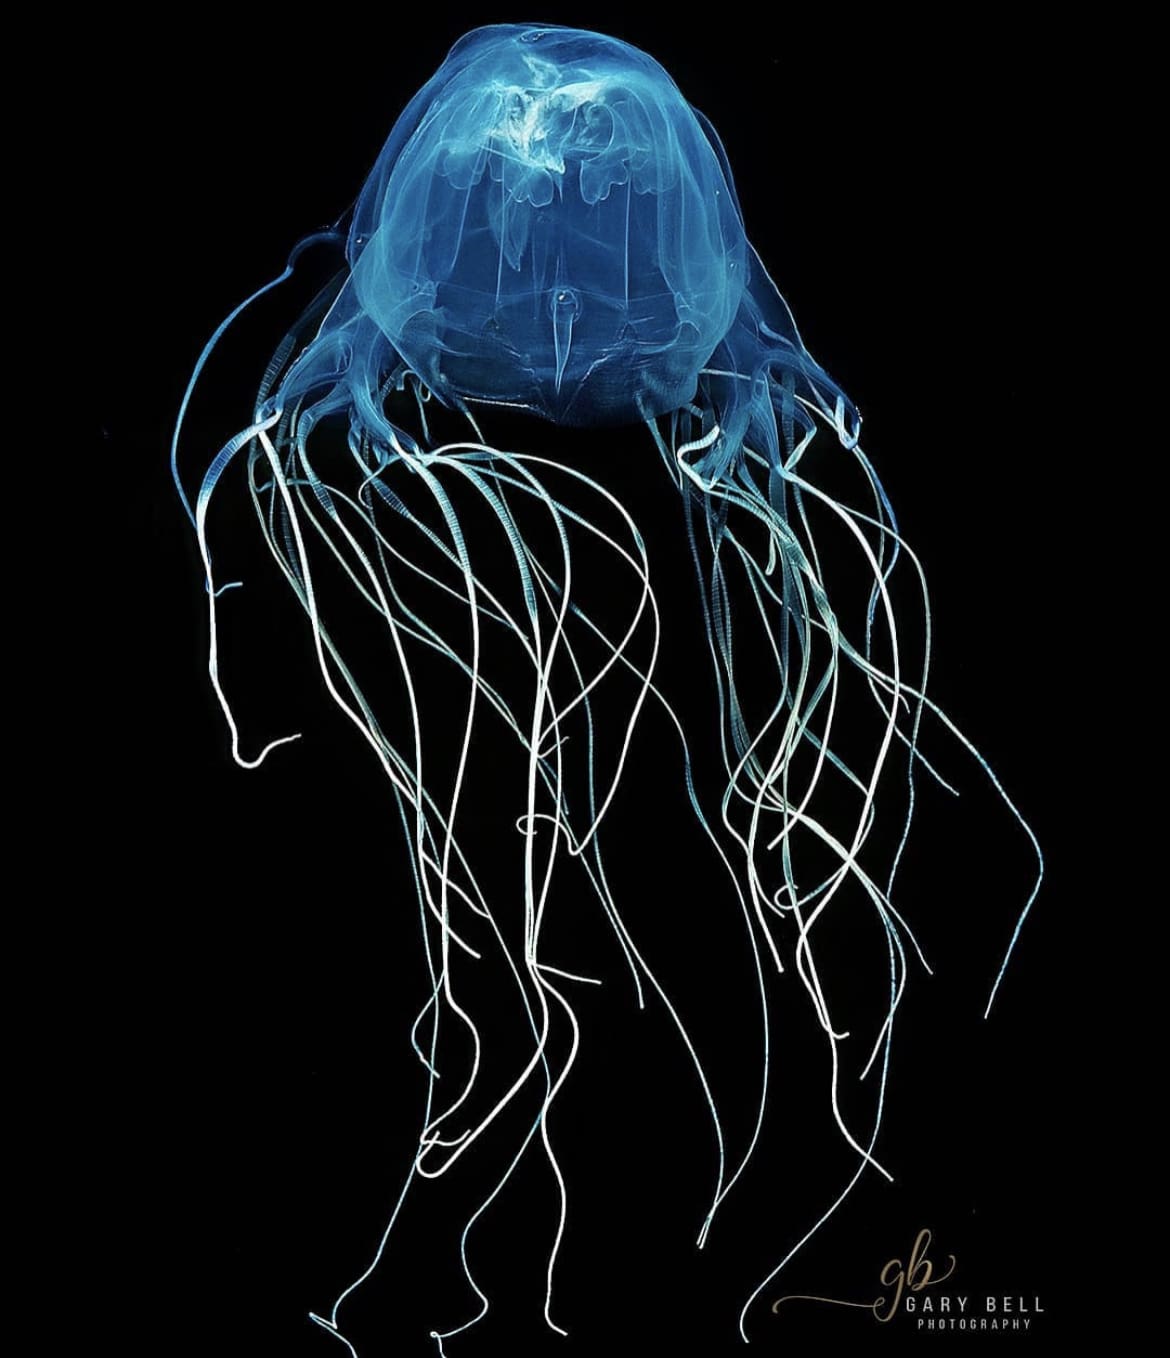 The Box Jellyfish - one of the most venomous animals on the planet